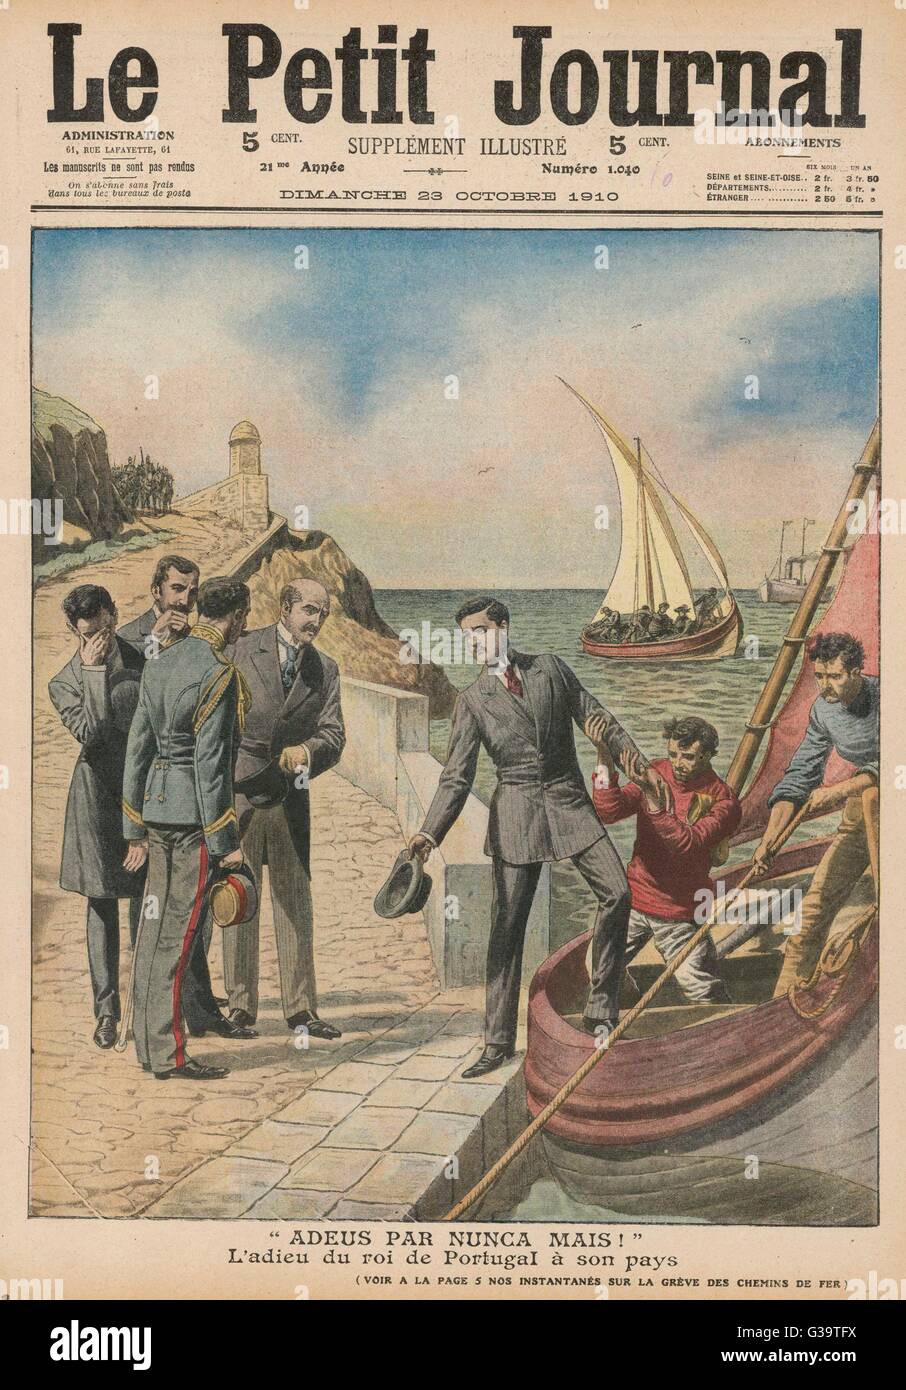 Manuel II, who succeeded his  assassinated father Carlos I,  abdicates and flees after  revolution implants a new  republic; 770 years of  Portuguese monarchy is ended     Date: 1910 Stock Photo